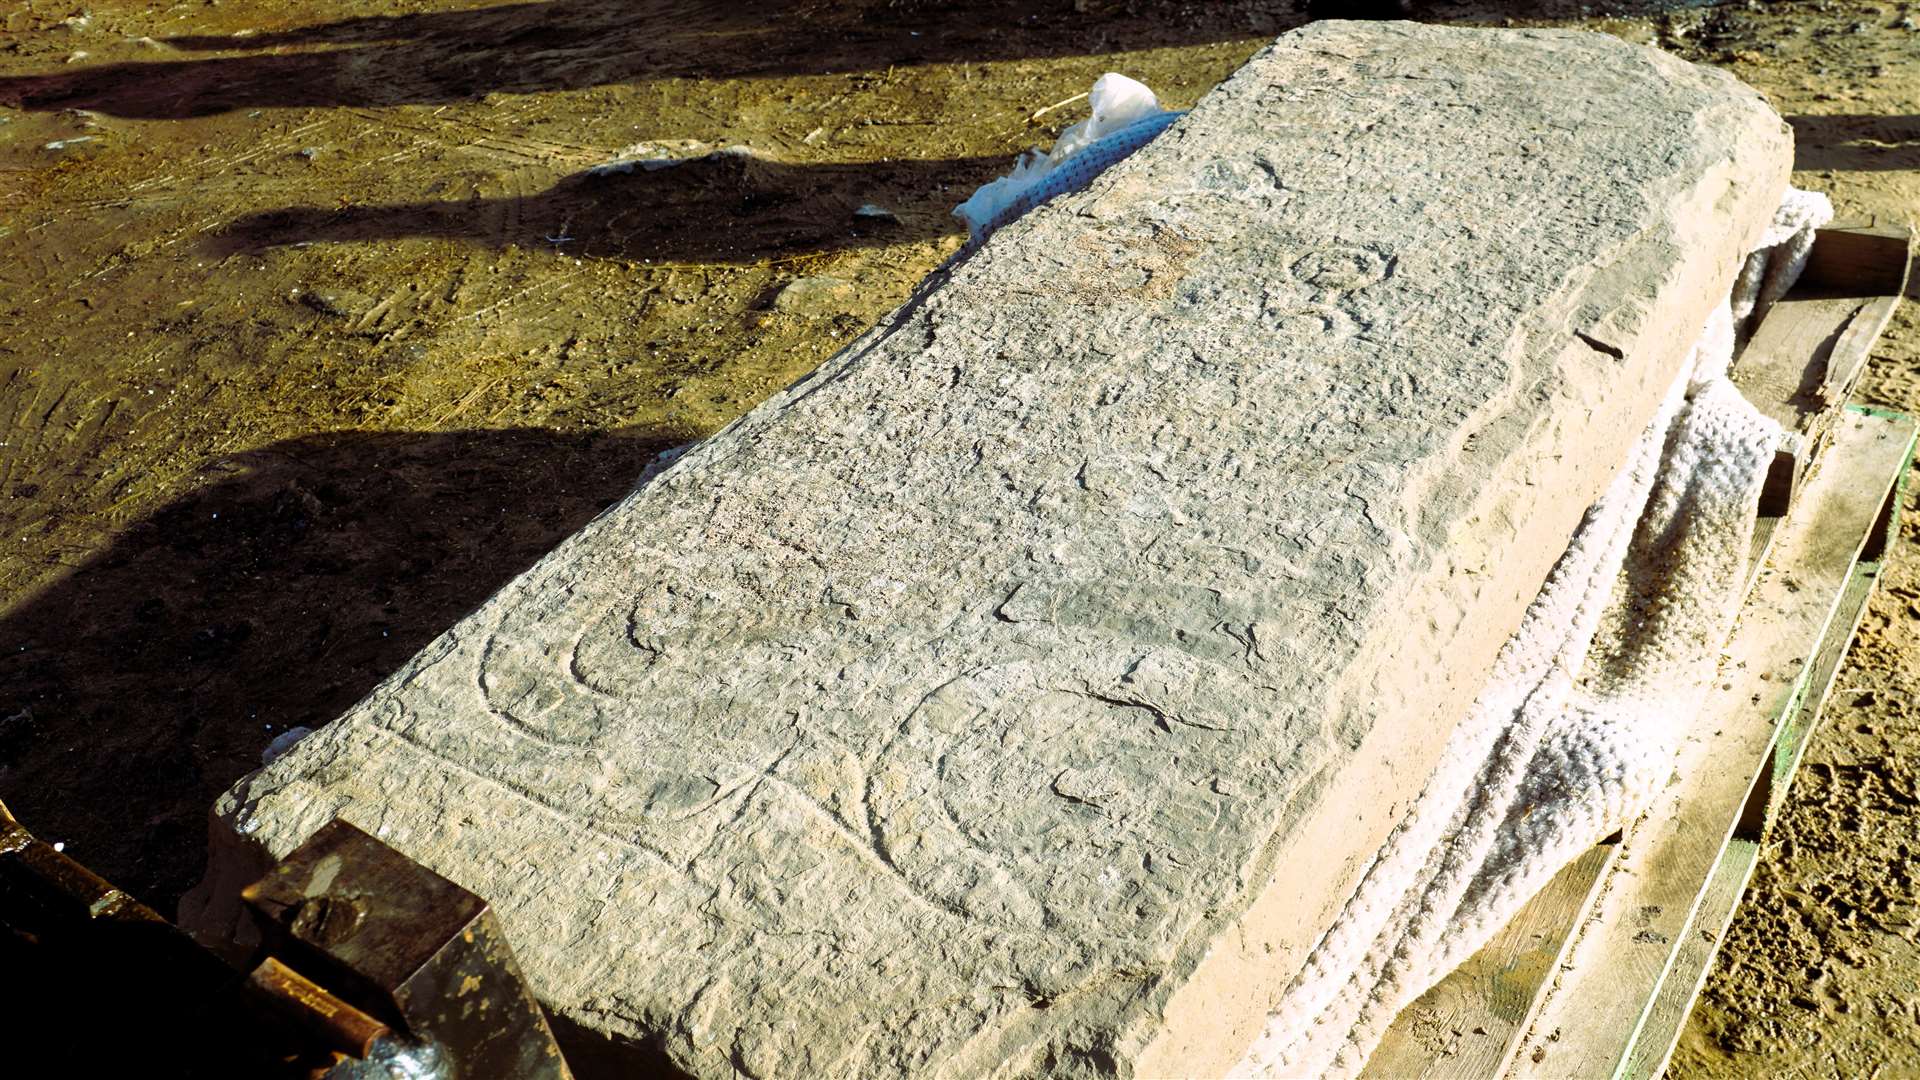 The Ulbster stone has Pictish symbols on its surface and is on its way to Edinburgh to be evaluated by experts. Picture: DGS